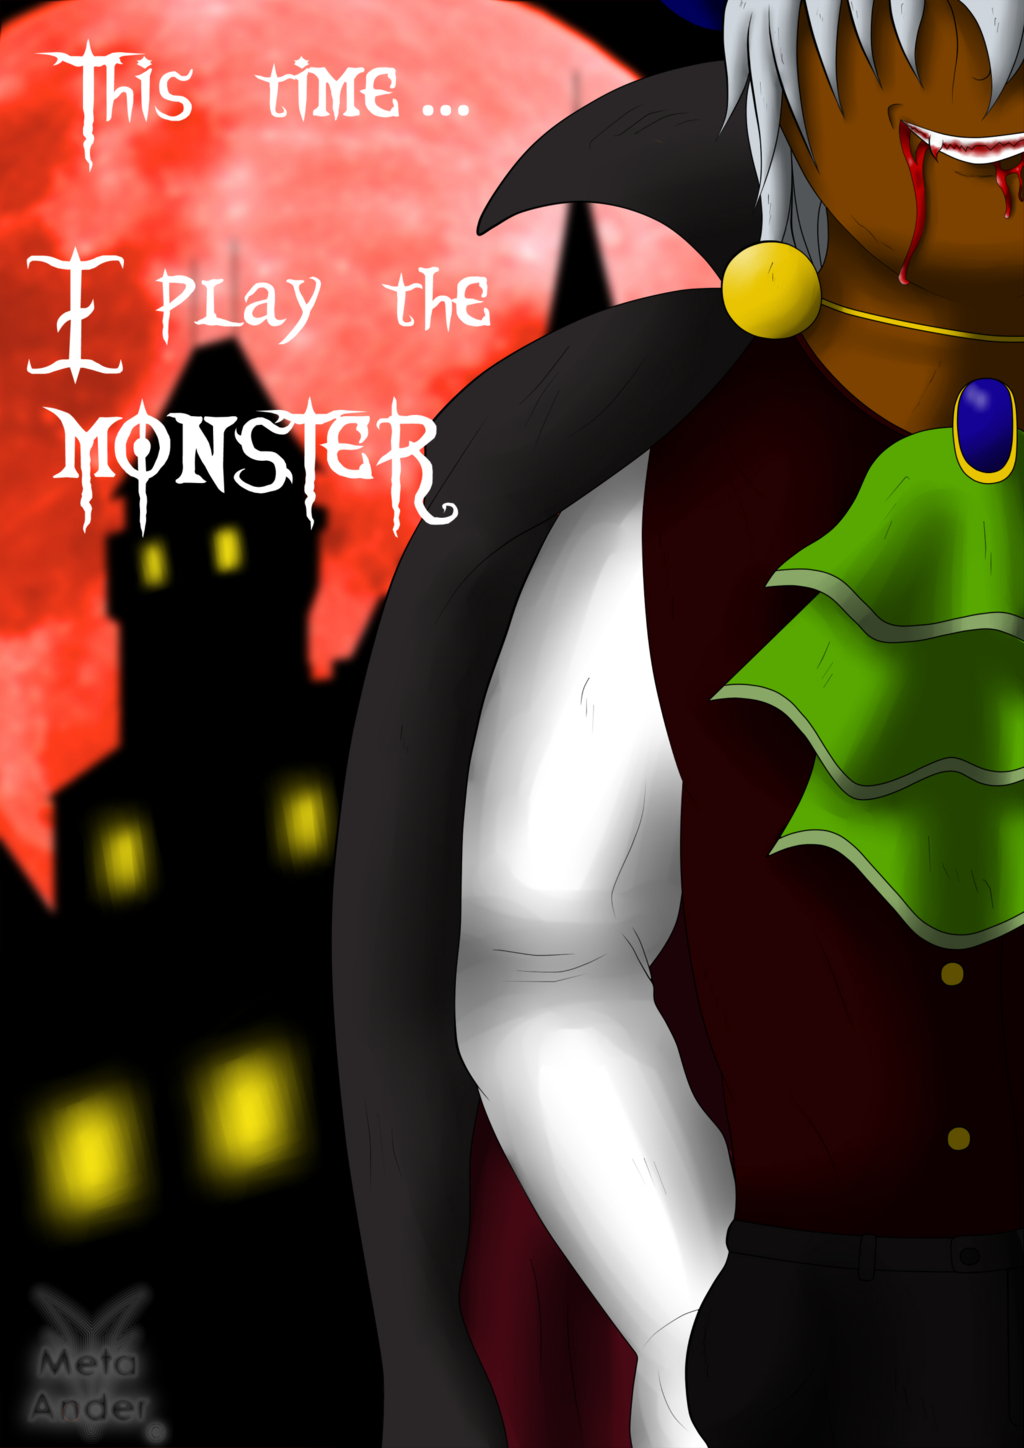 I play the Monster